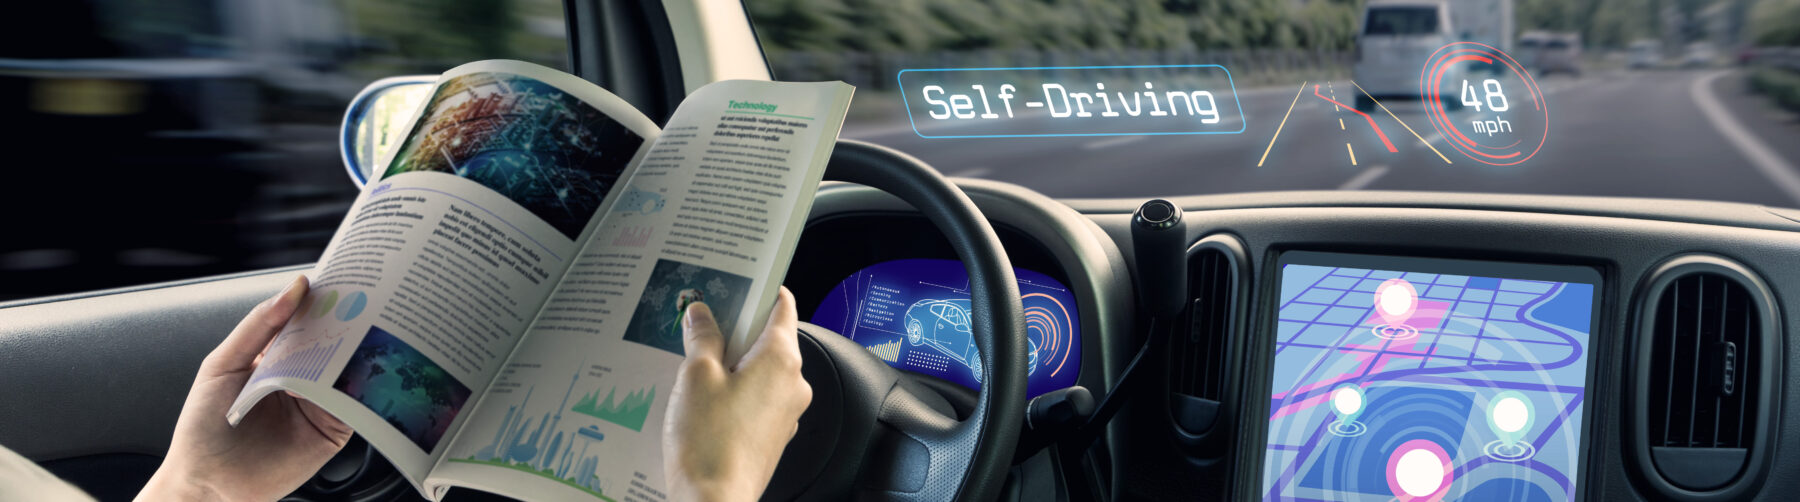 This picture depicts the cockpit of a self-driving car. The person sitting in the driving seat is reading a journal while the car is driving autonomously.